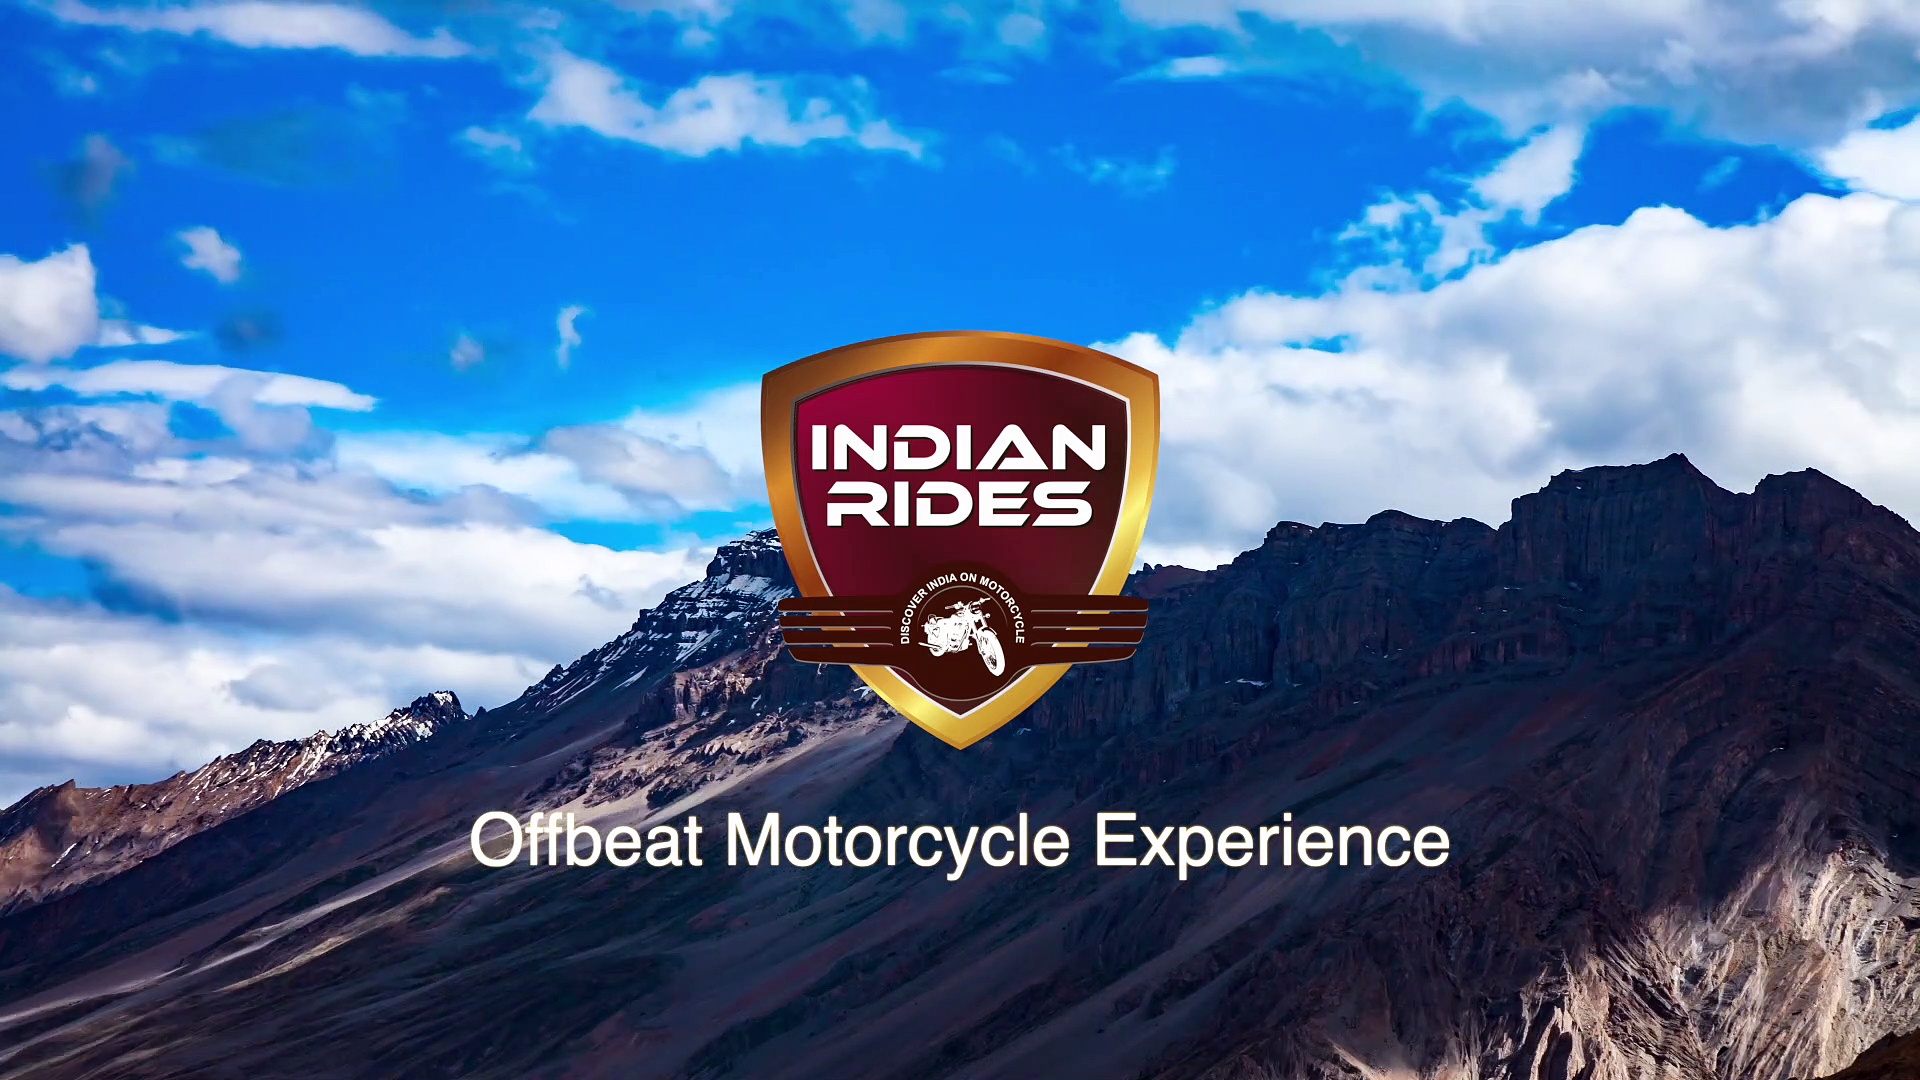 Lifetime Motorcycle adventure Trip You Must Take – breathtaking offbeat Motorcycle Travel Experience – Indian Rides